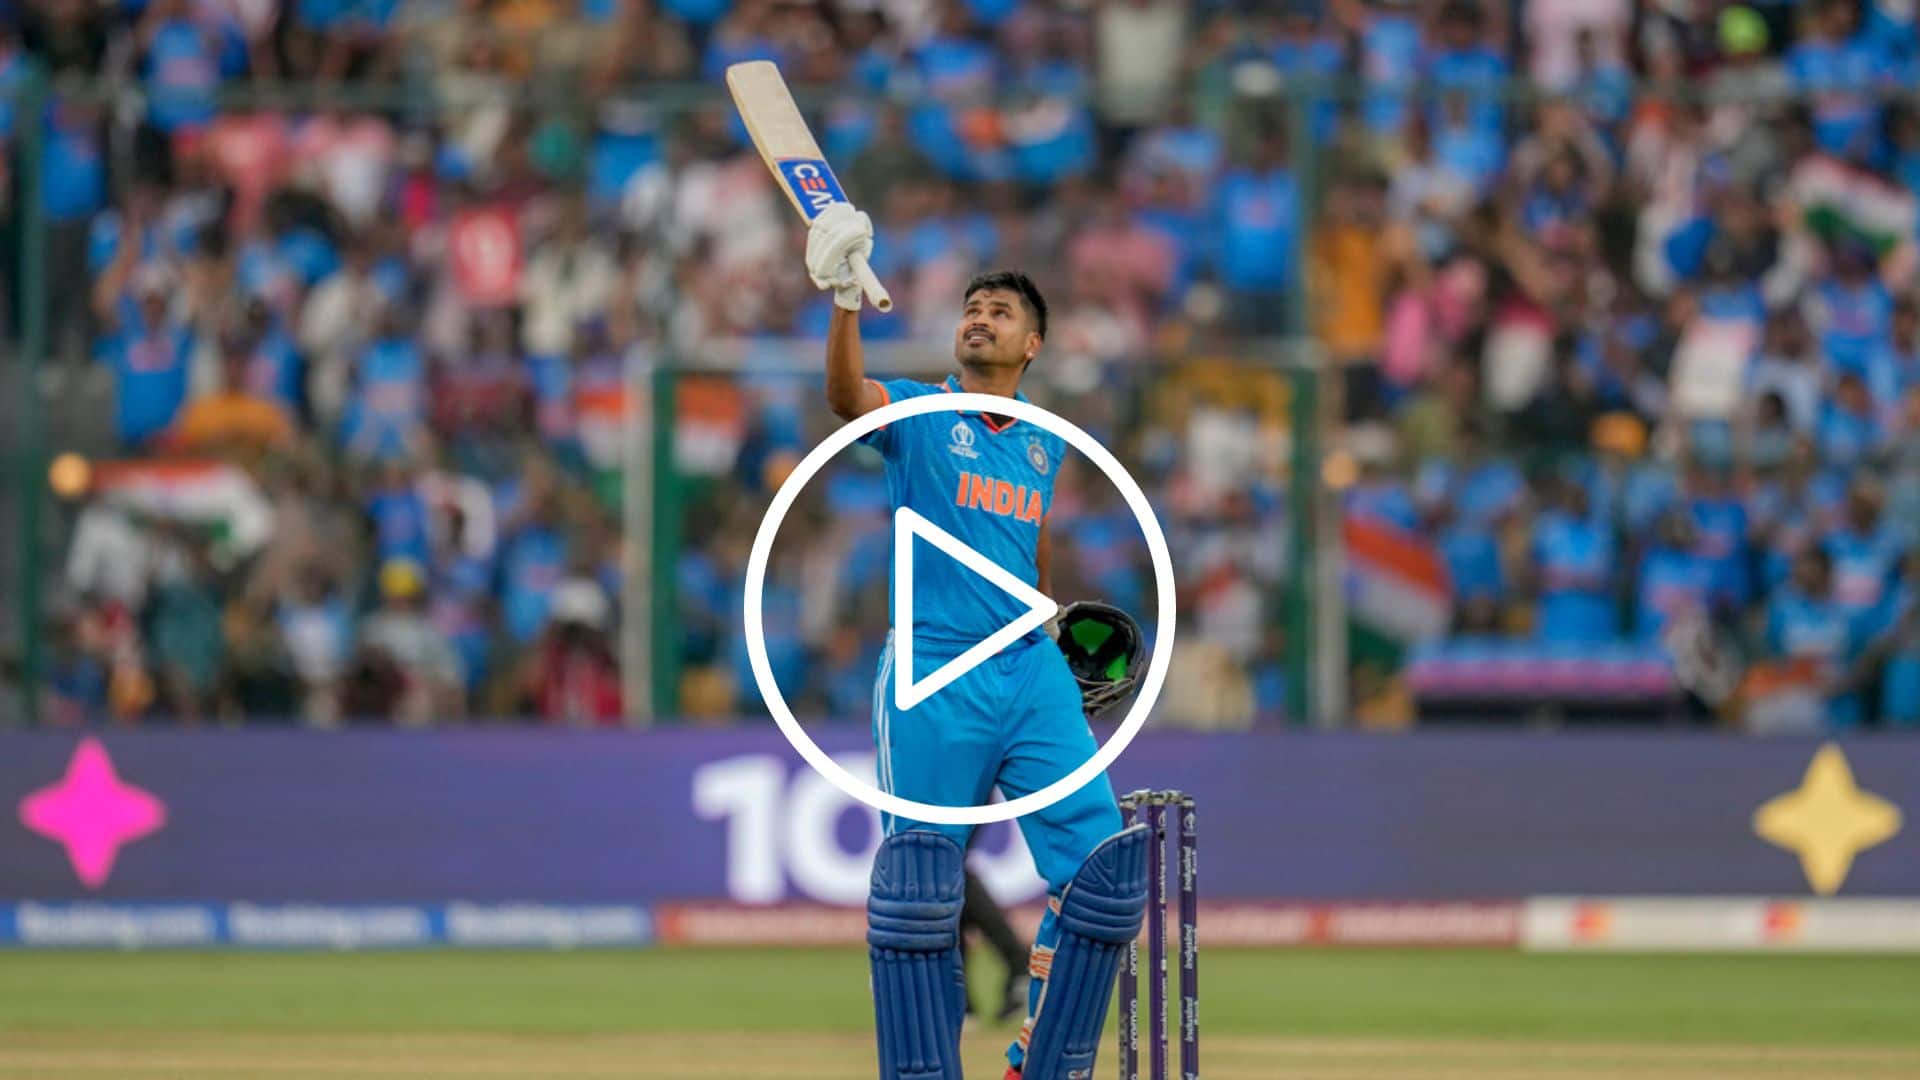 [Watch] Shreyas Iyer Slams His First World Cup Century In His Trademark Ultra-Aggressive Style